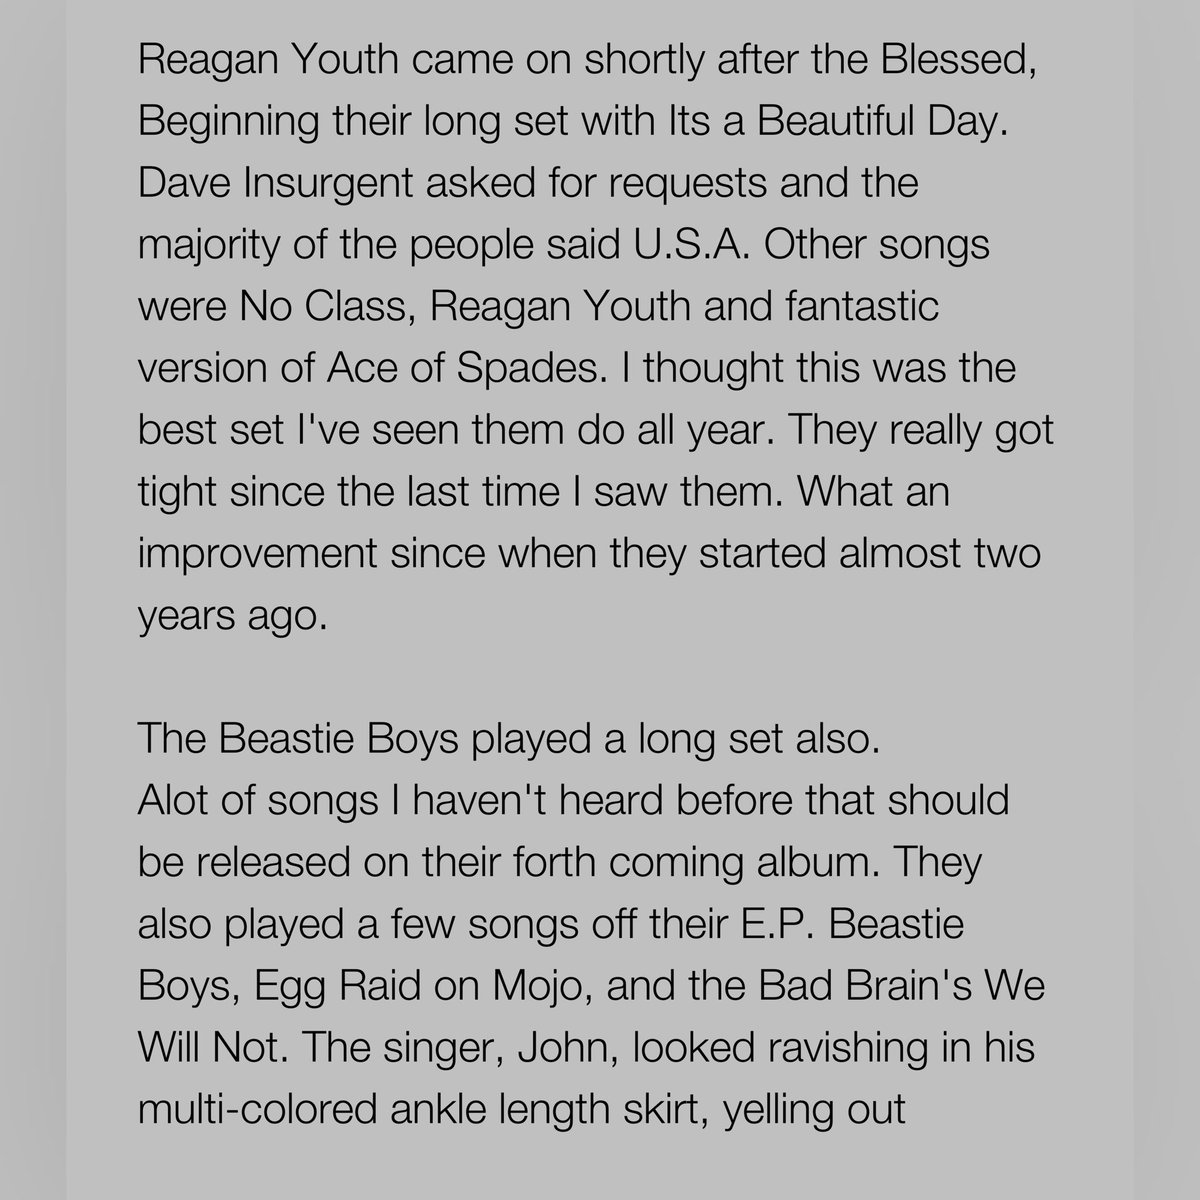 ReaganYouthBand tweet picture